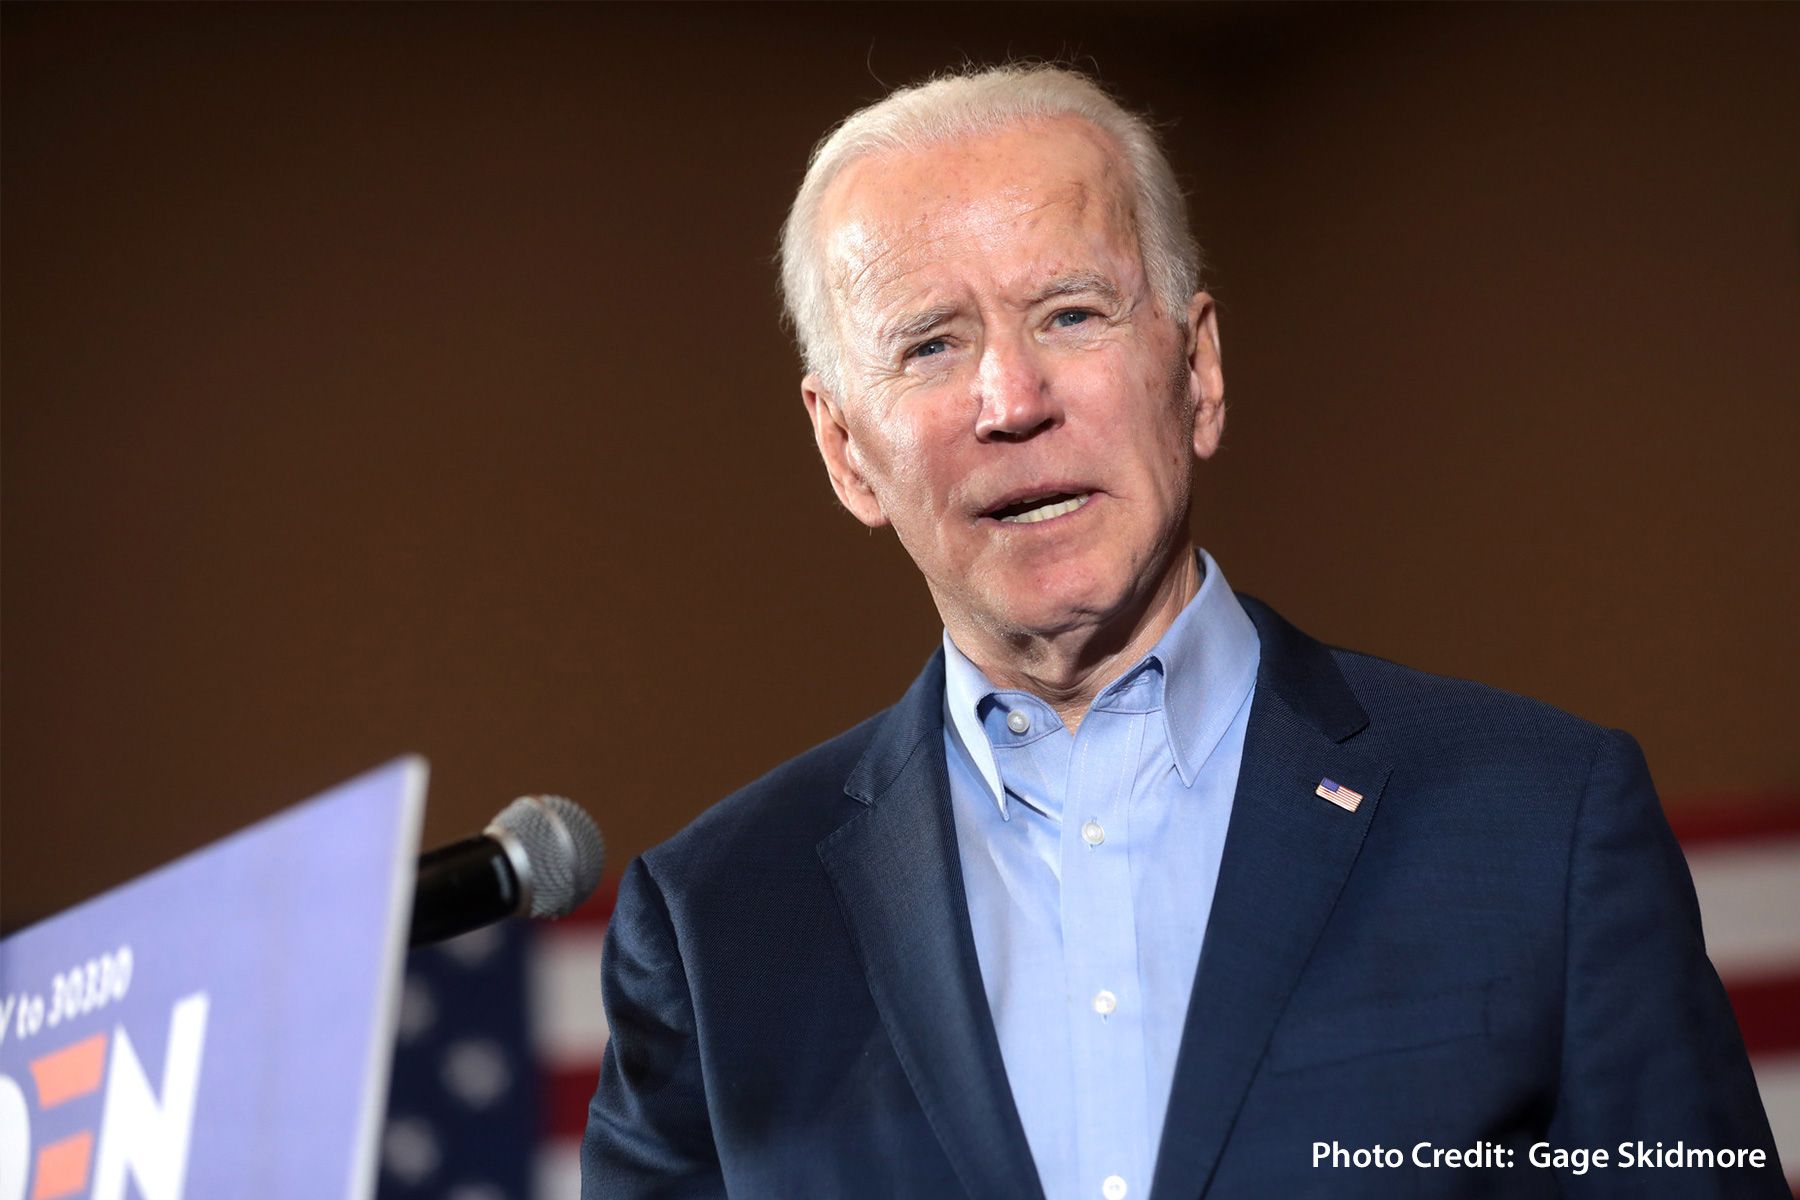 Biden Makes Another Push for Cancer Moonshot Initiative